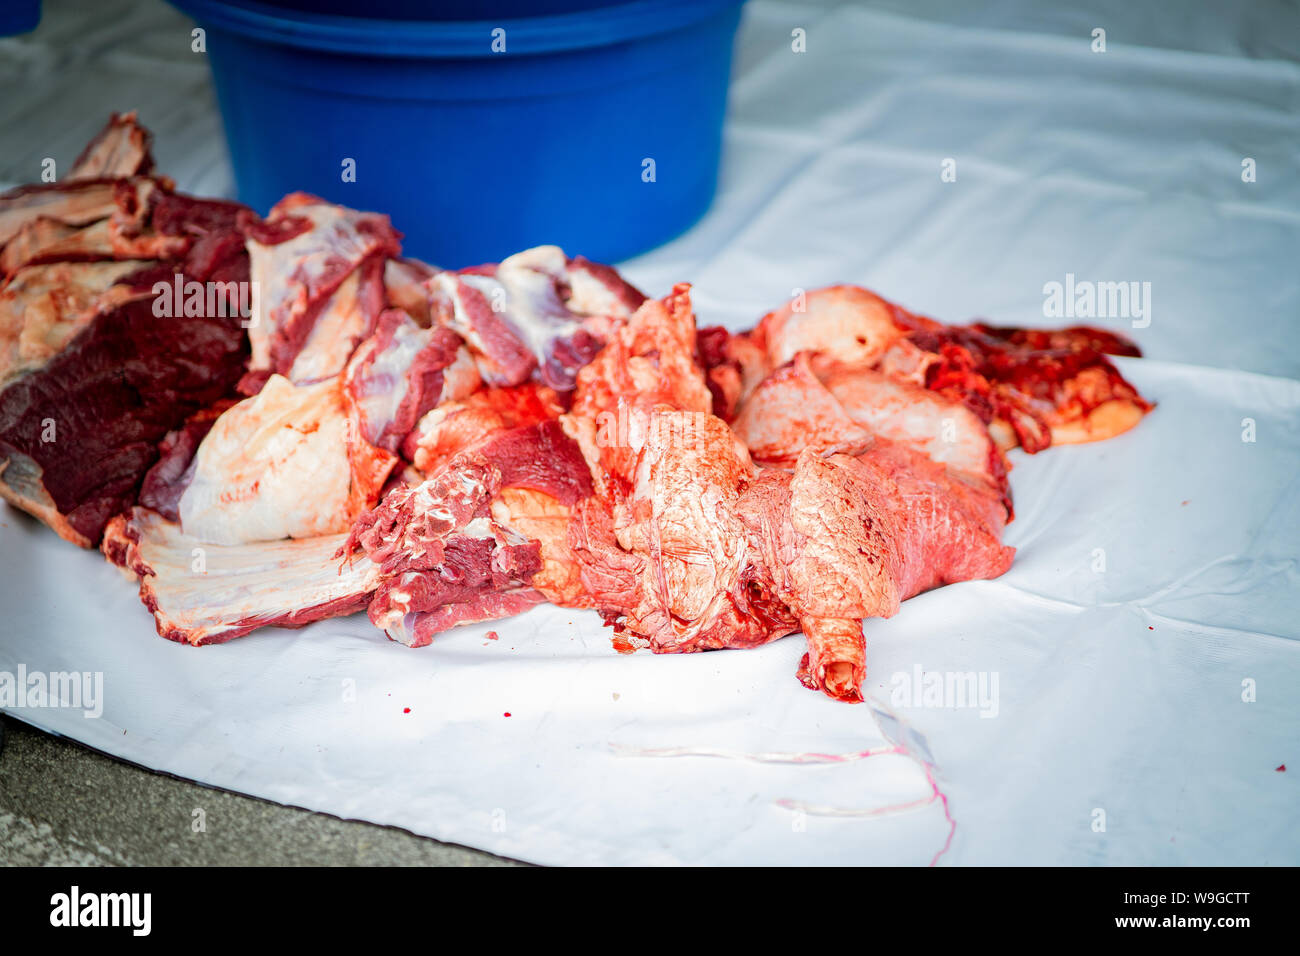 Raw meat from animal slaughtering performed on one to third day of Hari Raya Aidil Adha in Malaysia. Stock Photo